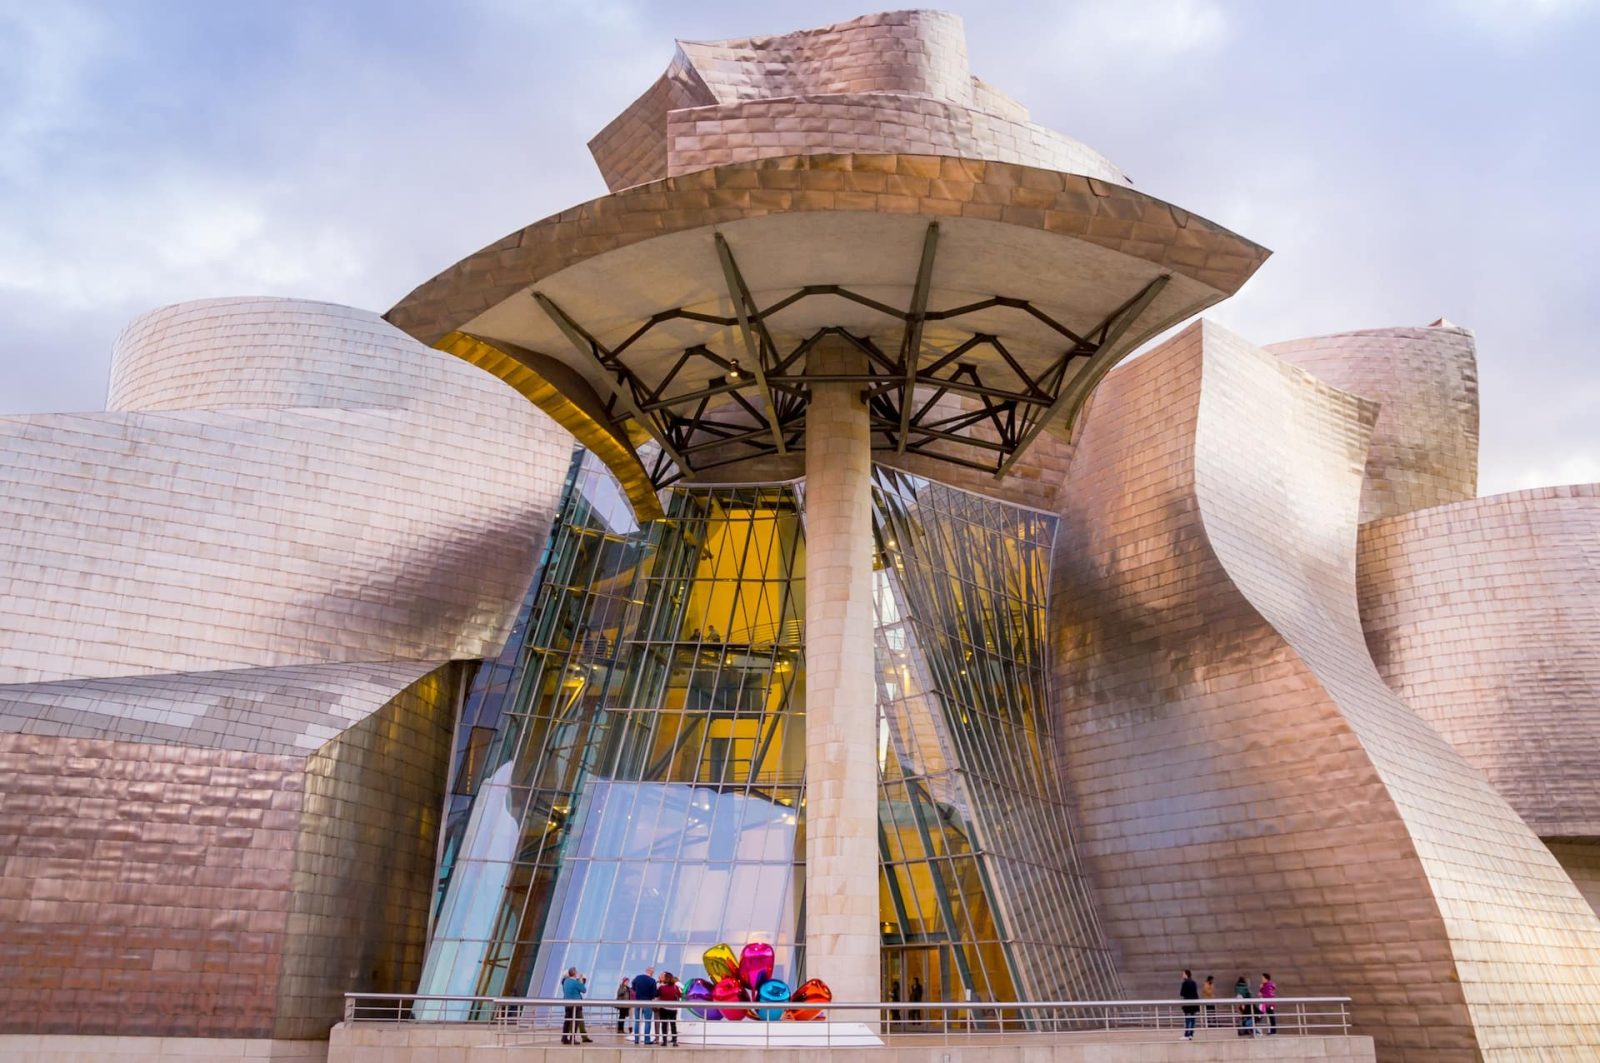 The Top 21 Museums in Spain